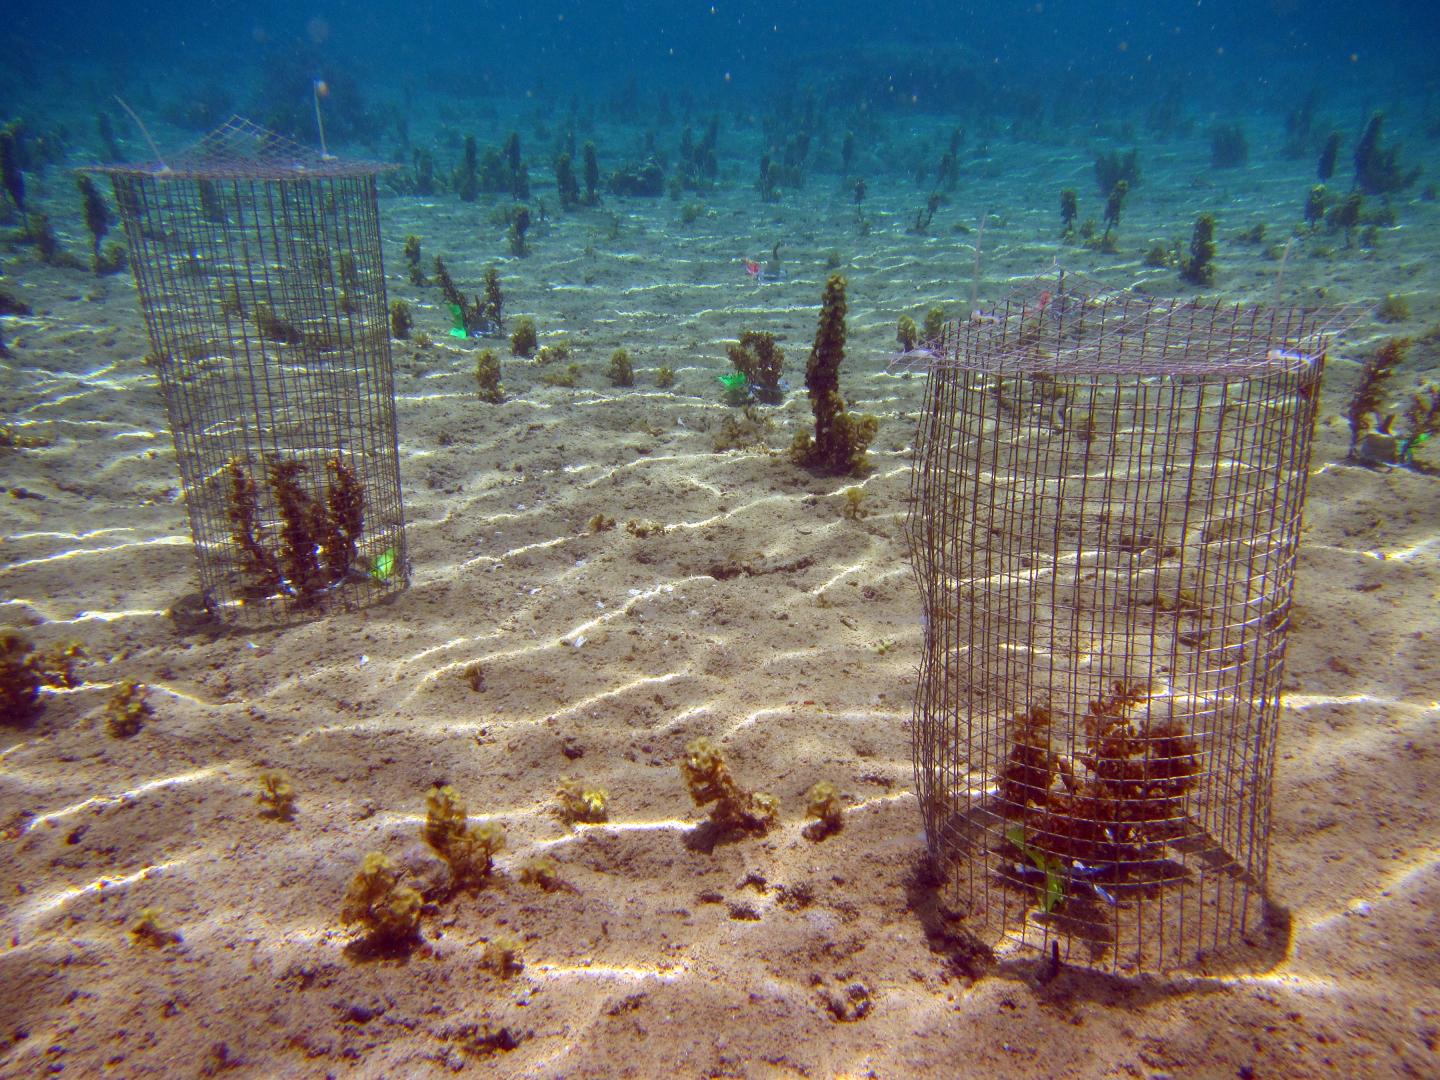 Cages for Coral Experiments